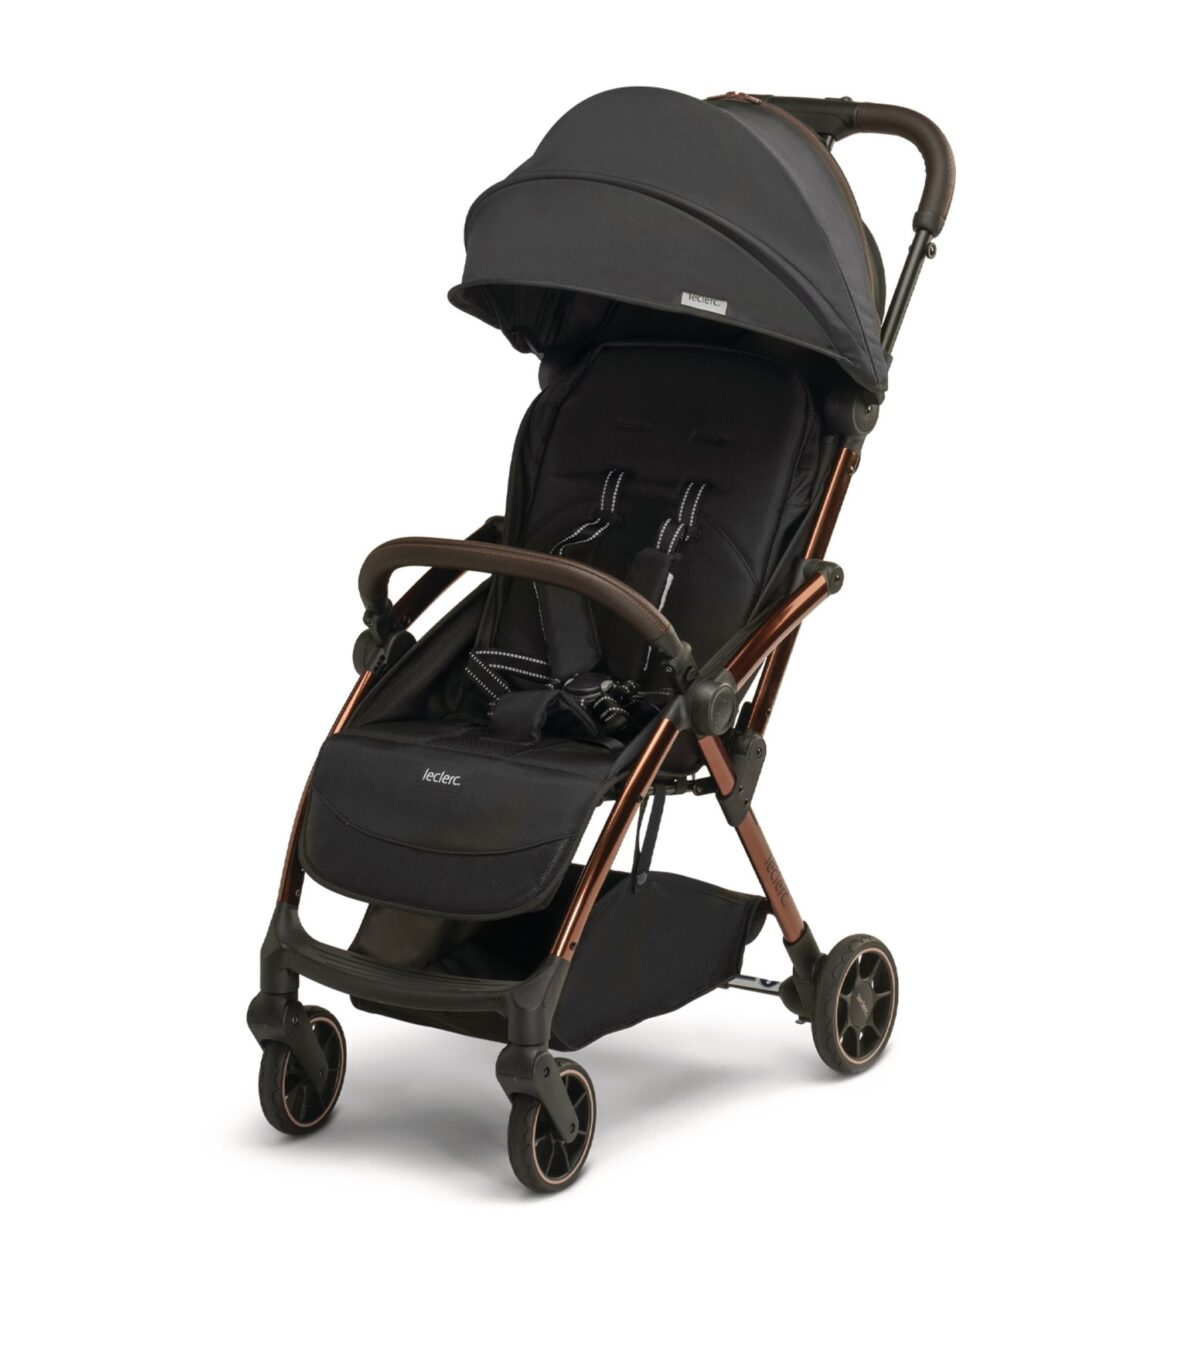 Best (and most expensive) luxury designer baby stroller brands and models to buy